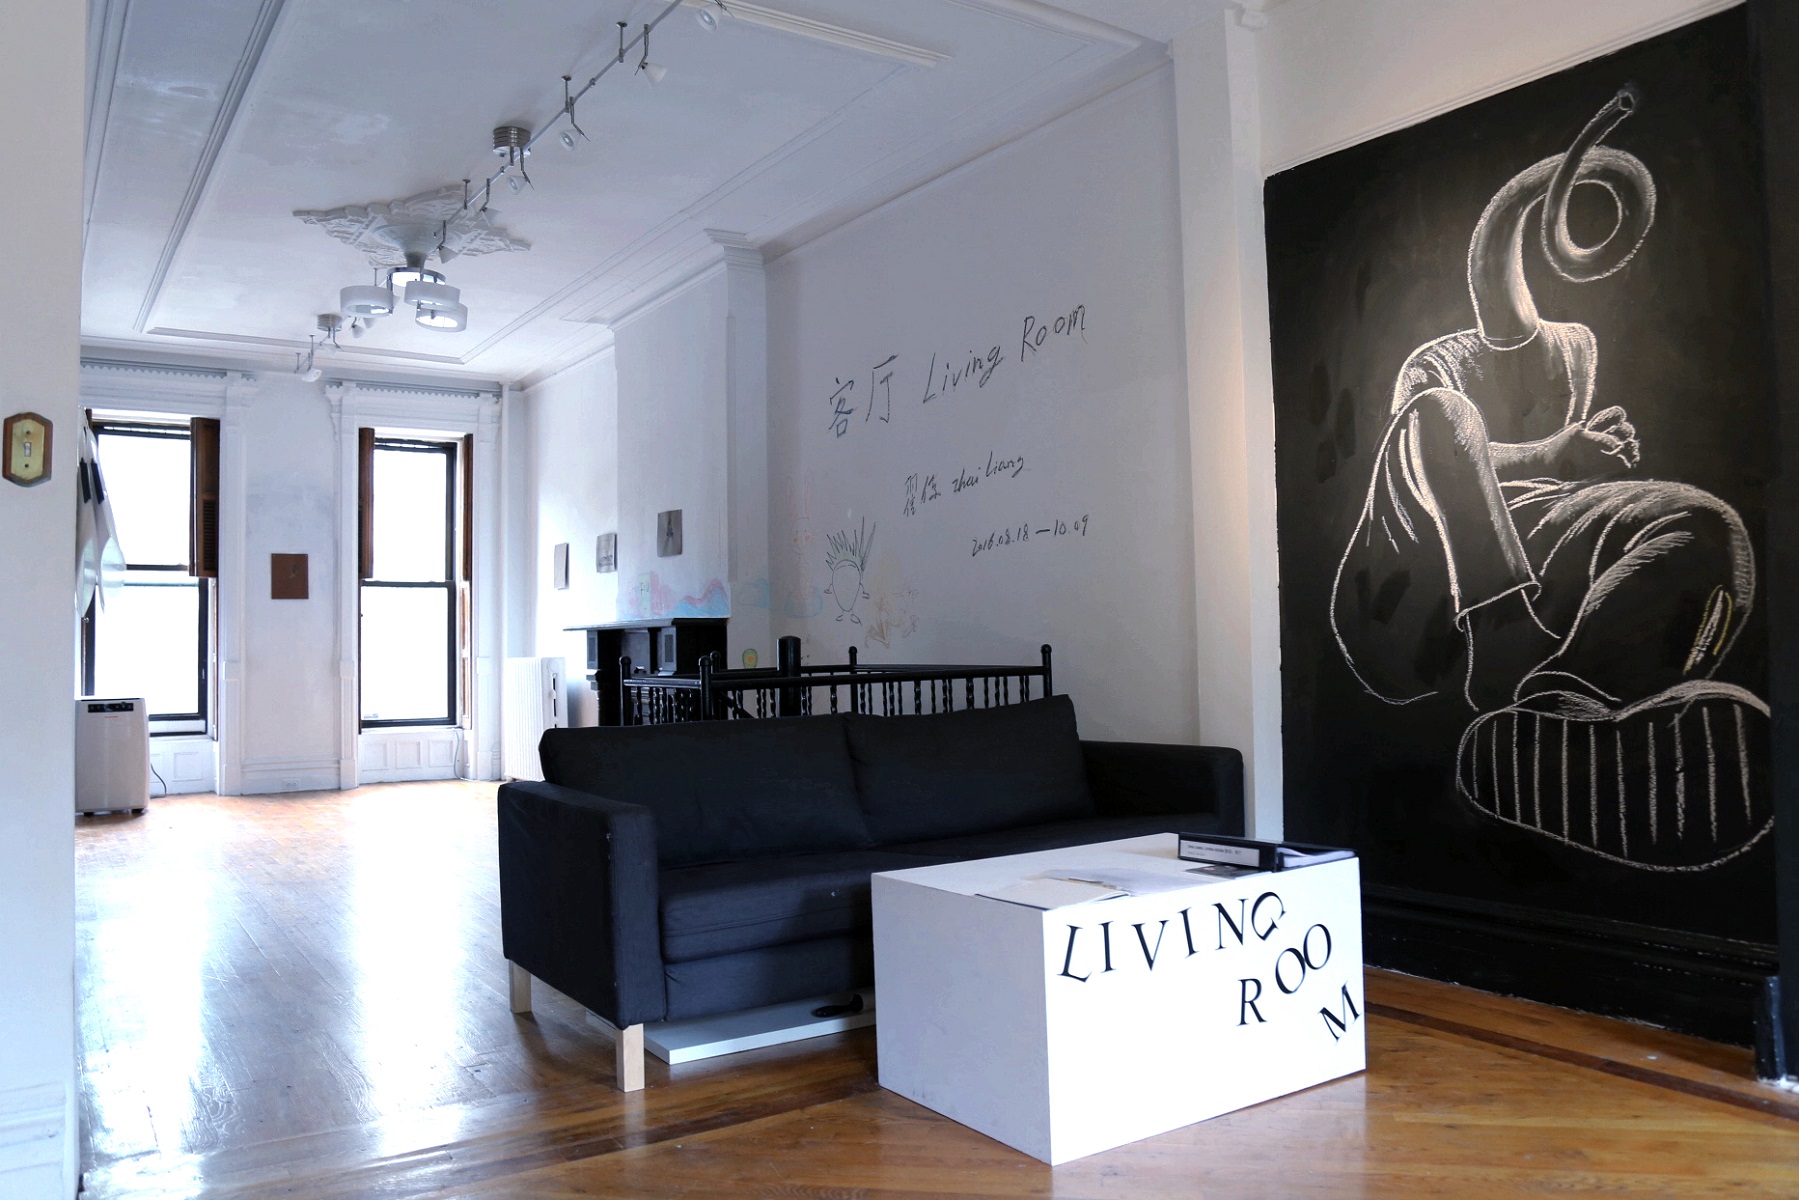  Zhai Liang: Living Room Installation view.  Photo by Patricia Chen. 